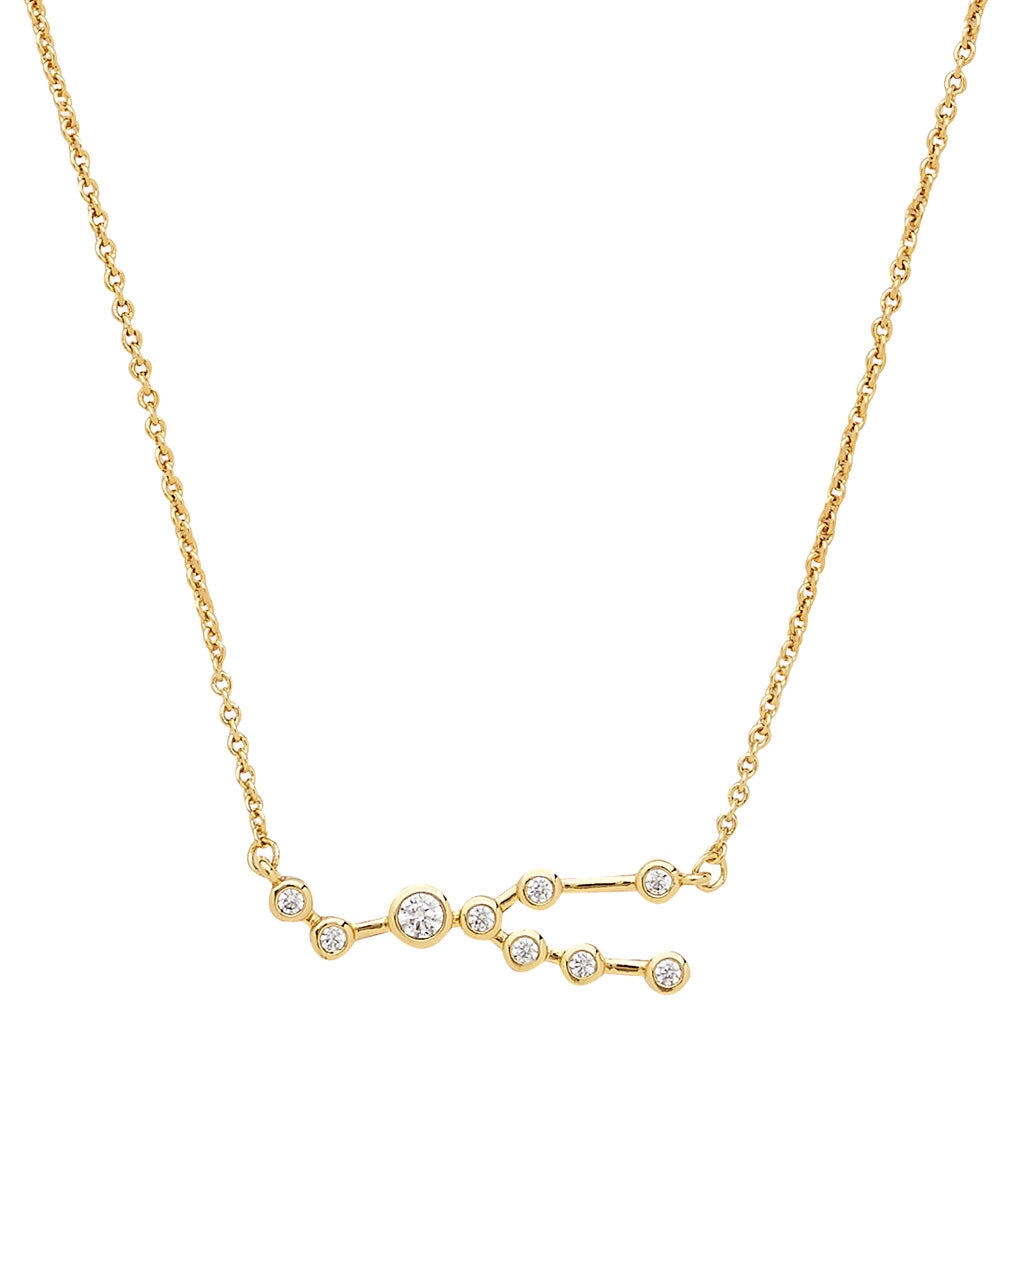 'When Stars Align' Constellation Necklace Necklace Sterling Forever Gold Taurus (Apr 20 - May 20) 